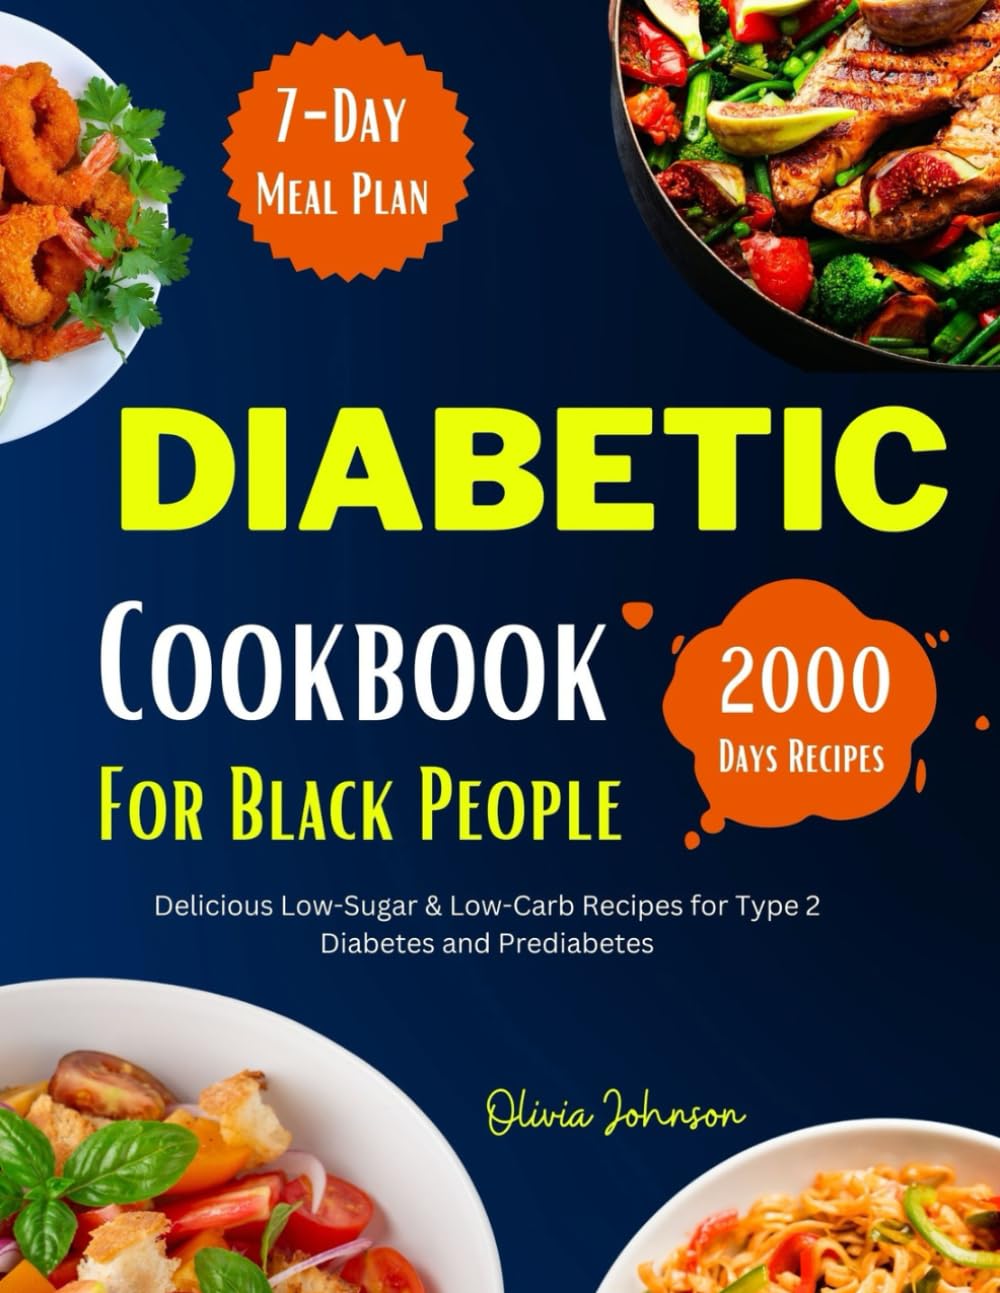 Diabetic Cookbook For Black People: Delicious Low-Sugar & Low-Carb Recipes for Type 2 Diabetes and Prediabetes. Include 7-Day Meal Plan and Nutritional Information.